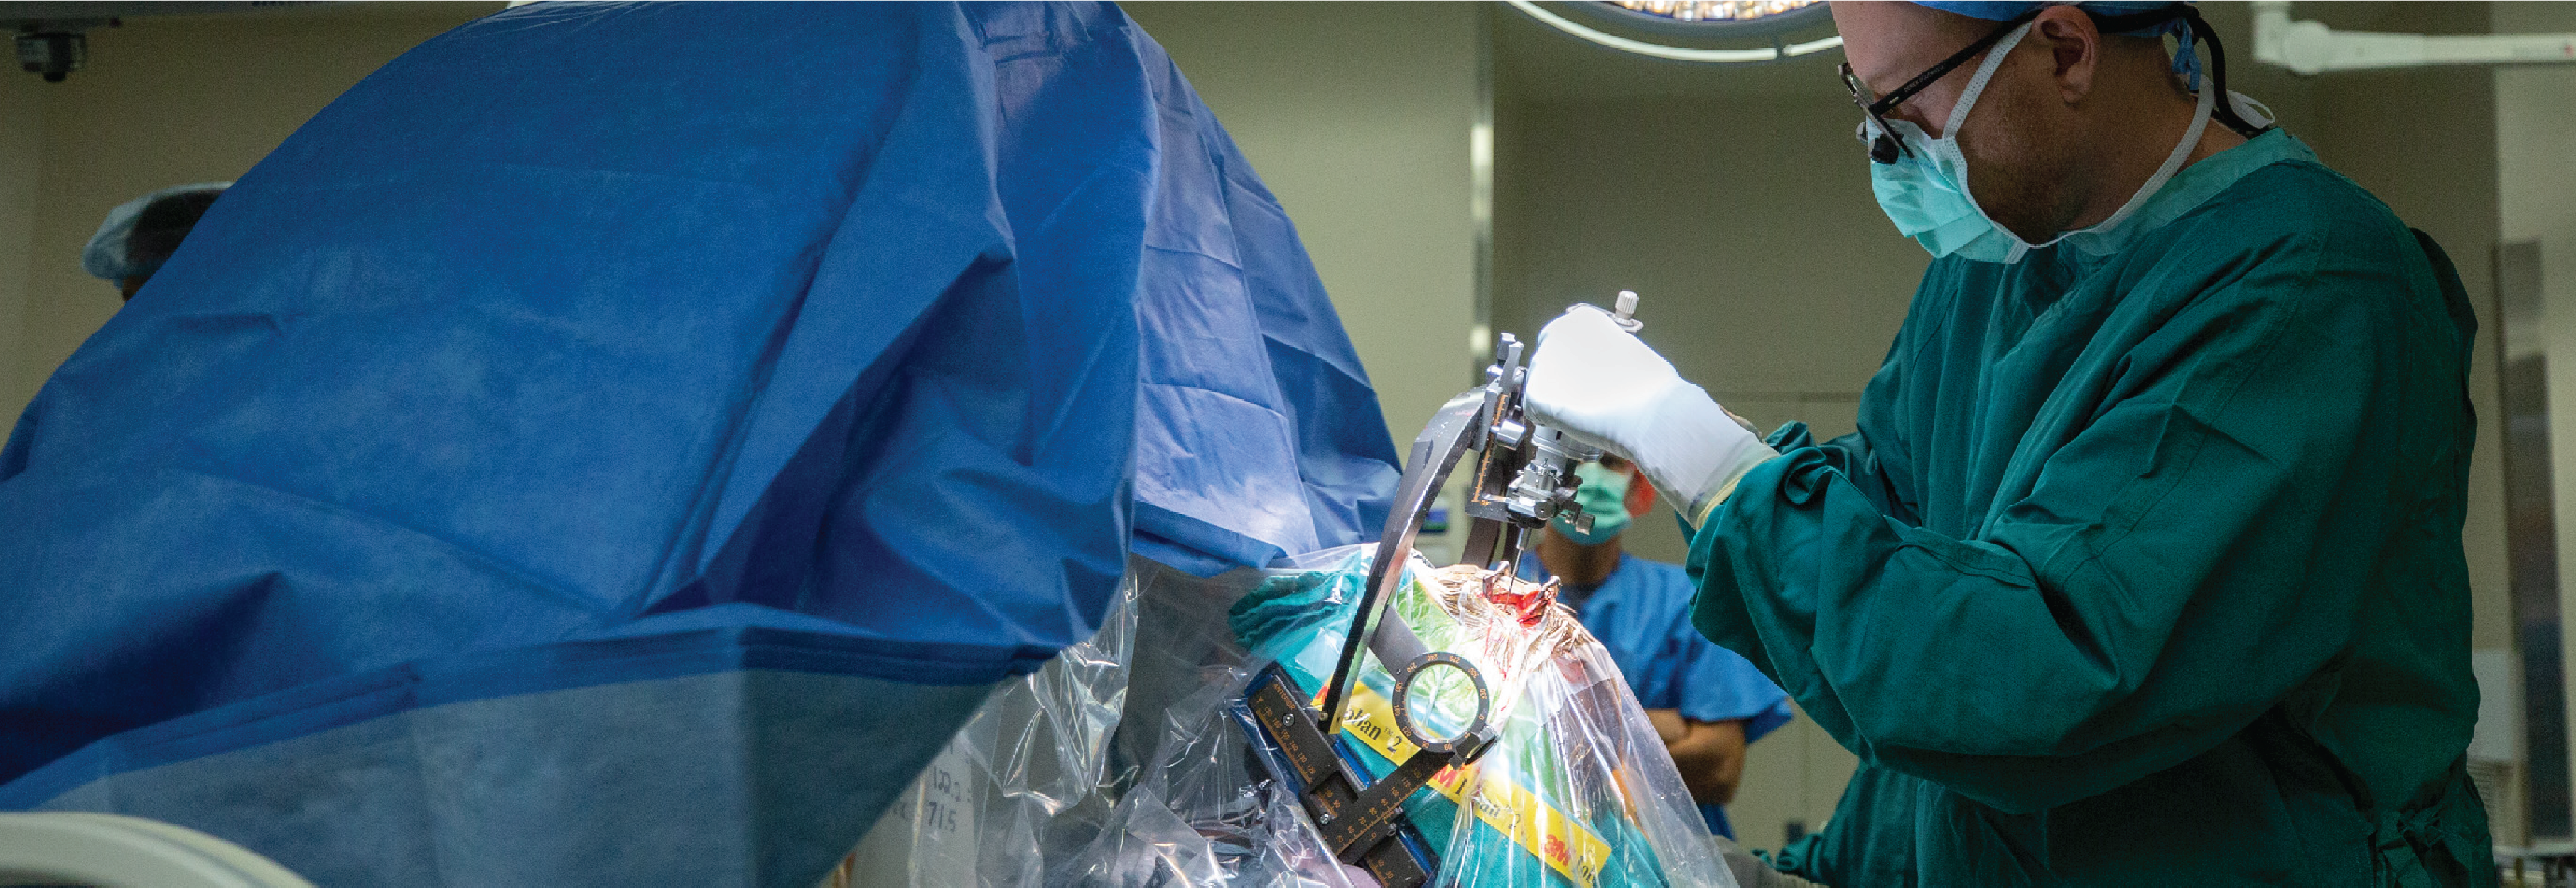 Dr. Southwell during the procedure in the operating room